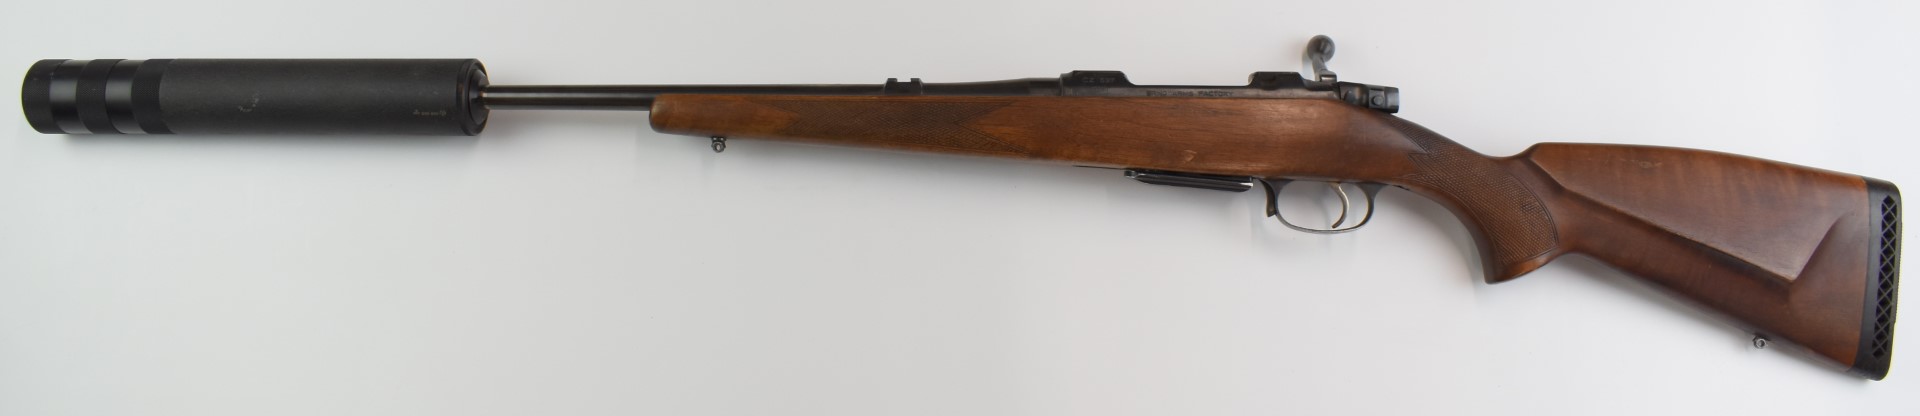 BRNO CZ 537 .243 bolt-action rifle with chequered semi-pistol grip and forend, raised cheek-piece, - Image 11 of 20